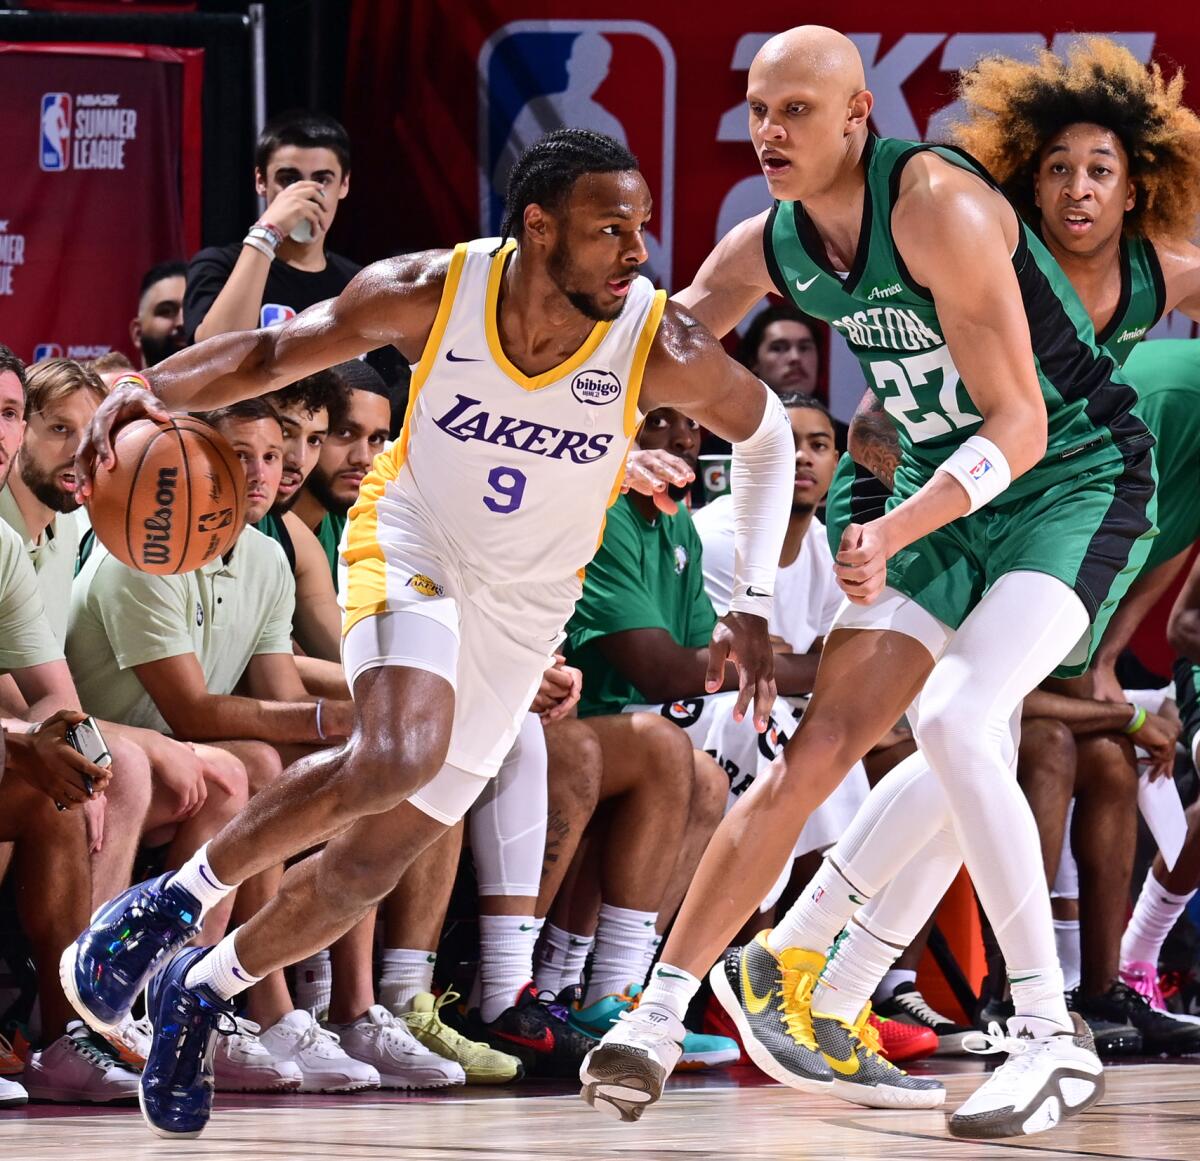 Lakers' Bronny James dribbles the ball during a Summer League game against the Celtics